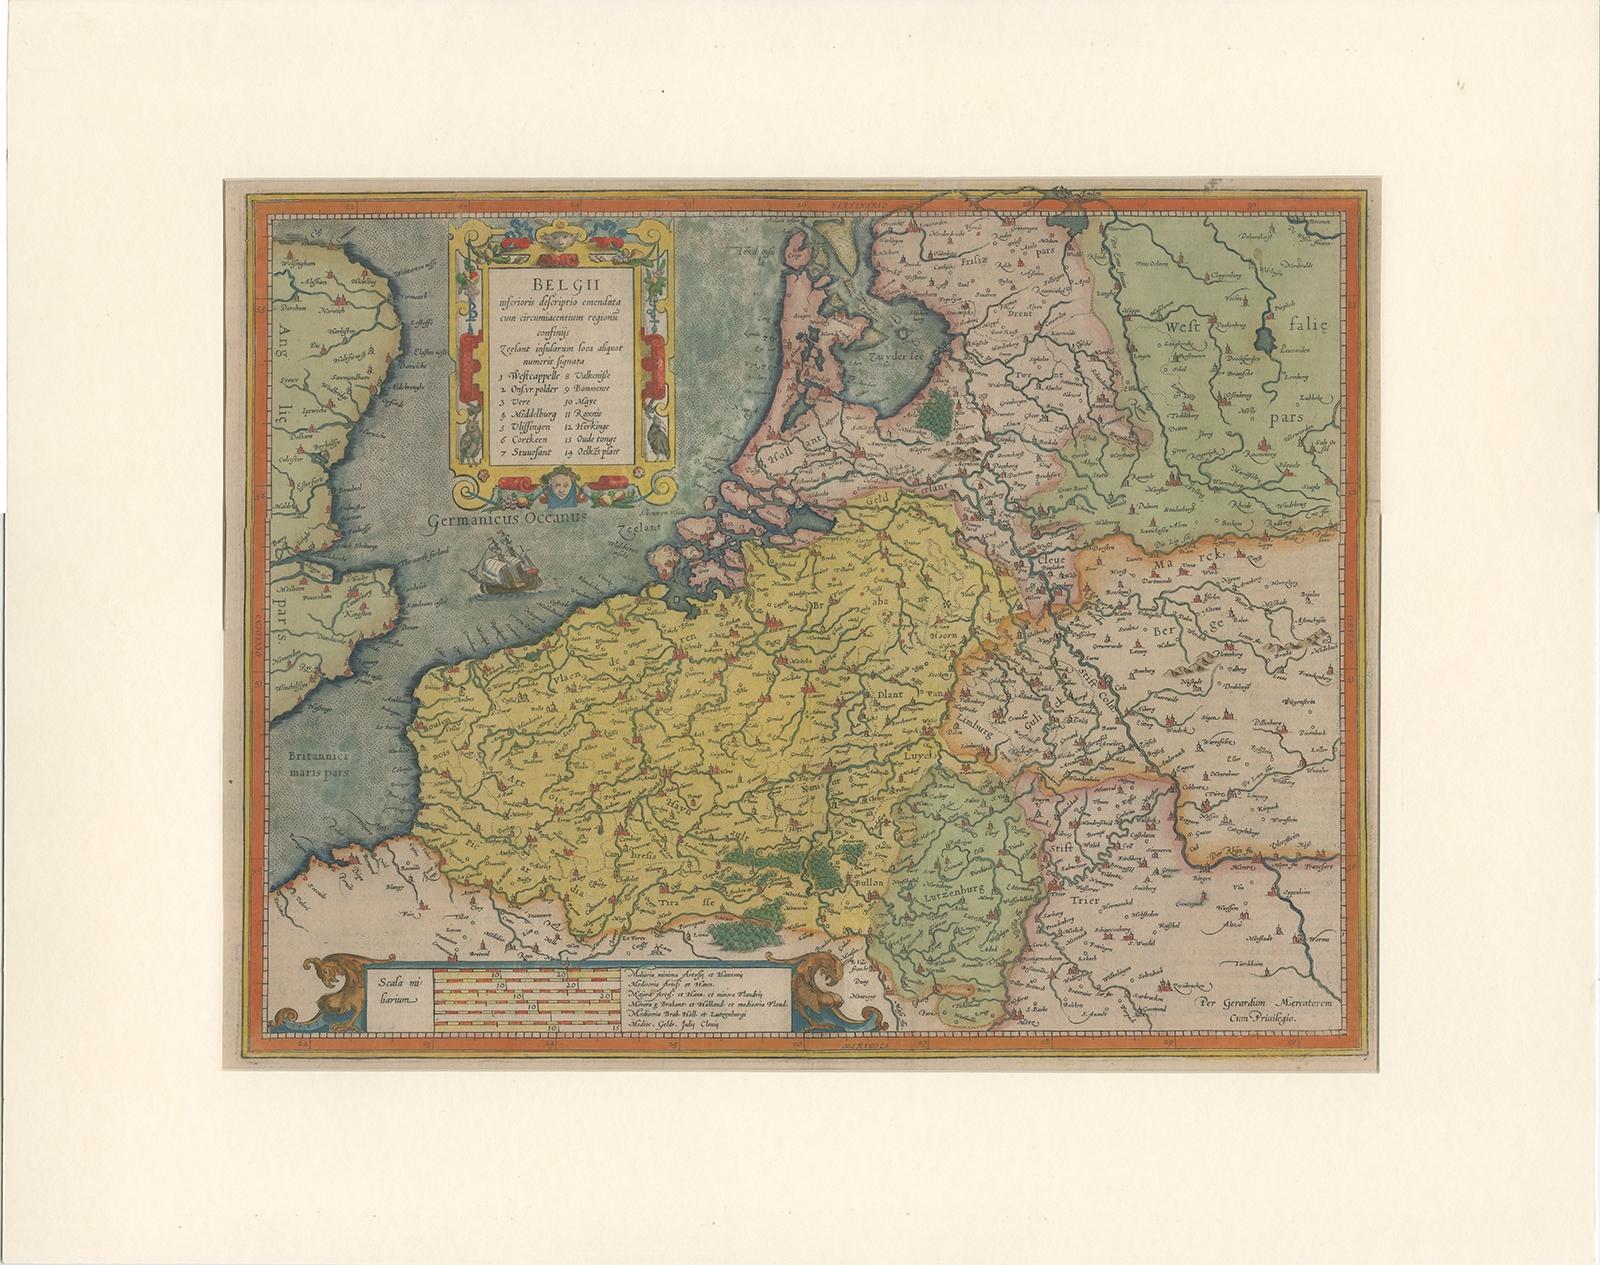 Antique map titled 'Belgii inferioris descriptio (..)'. 

Old map of the Seventeen Provinces, the Imperial states of the Habsburg Netherlands in the 16th century. They roughly covered the Low Countries, i.e. what is now the Netherlands, Belgium,